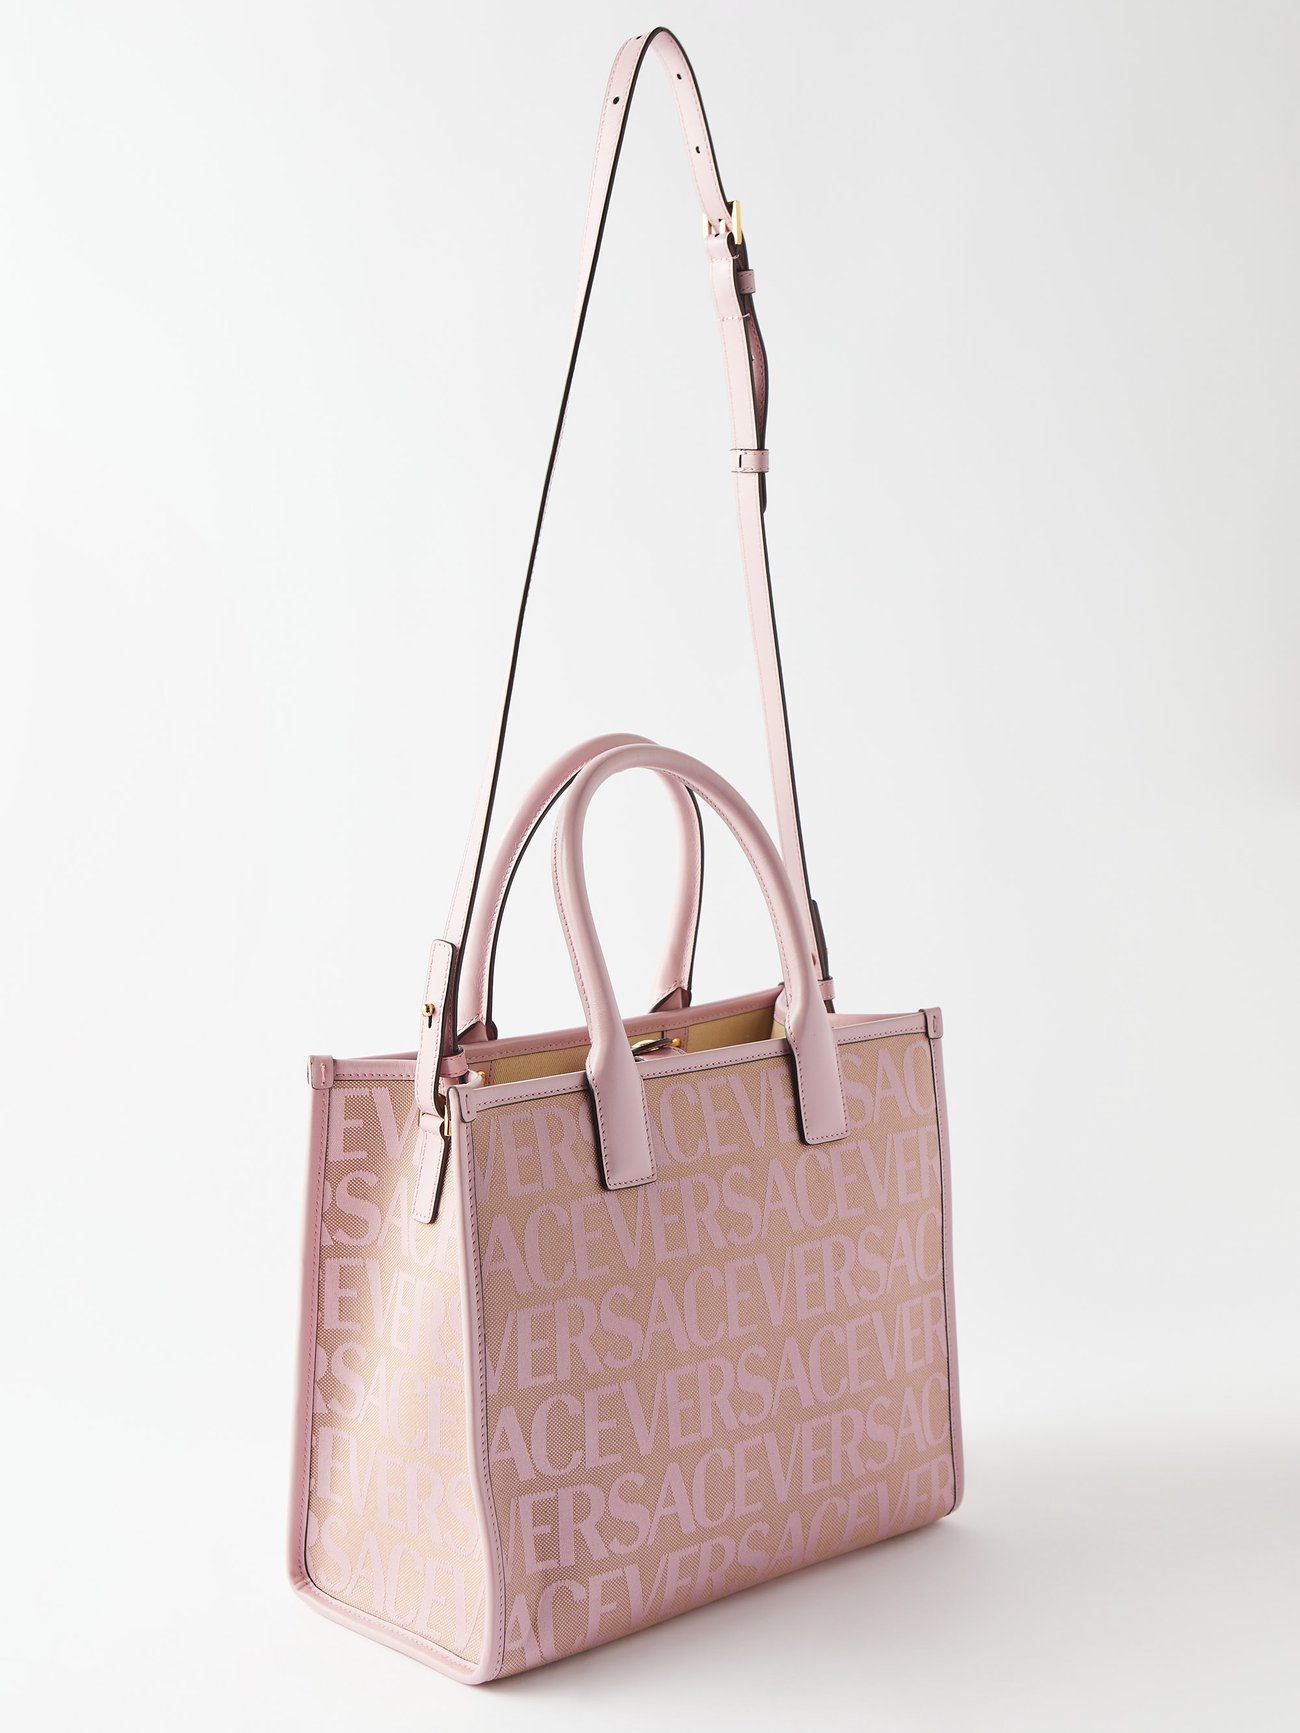 VERSACE: Allover ag in jacquard canvas - Pink  Versace tote bags  10047411A08199 online at